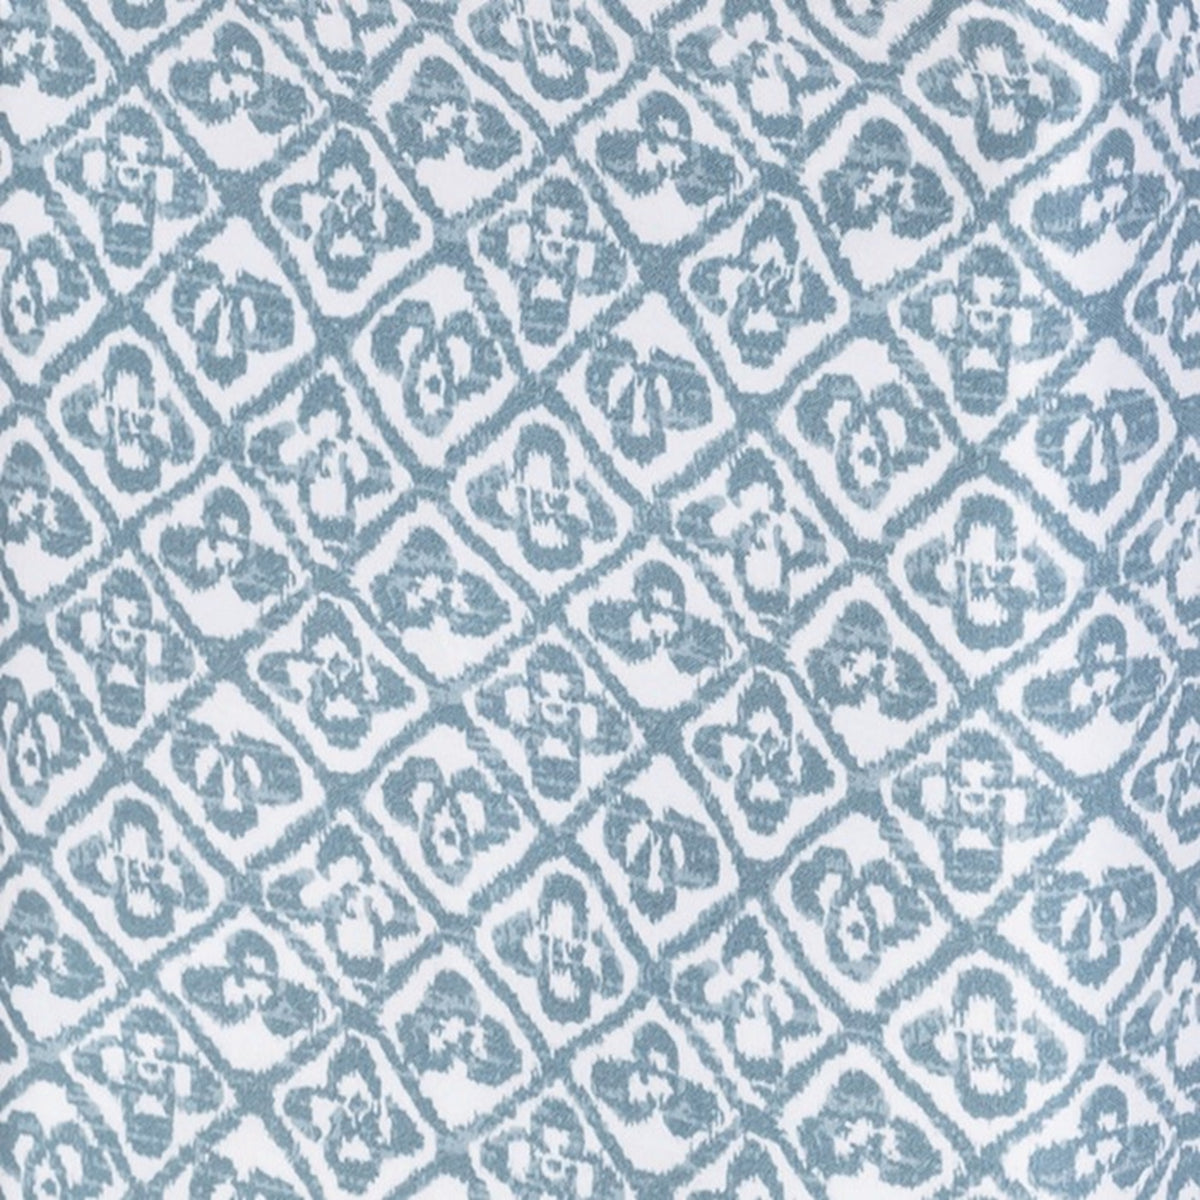 Swatch Sample of Matouk Catarina Tissue Box Cover in Color Hazy Blue